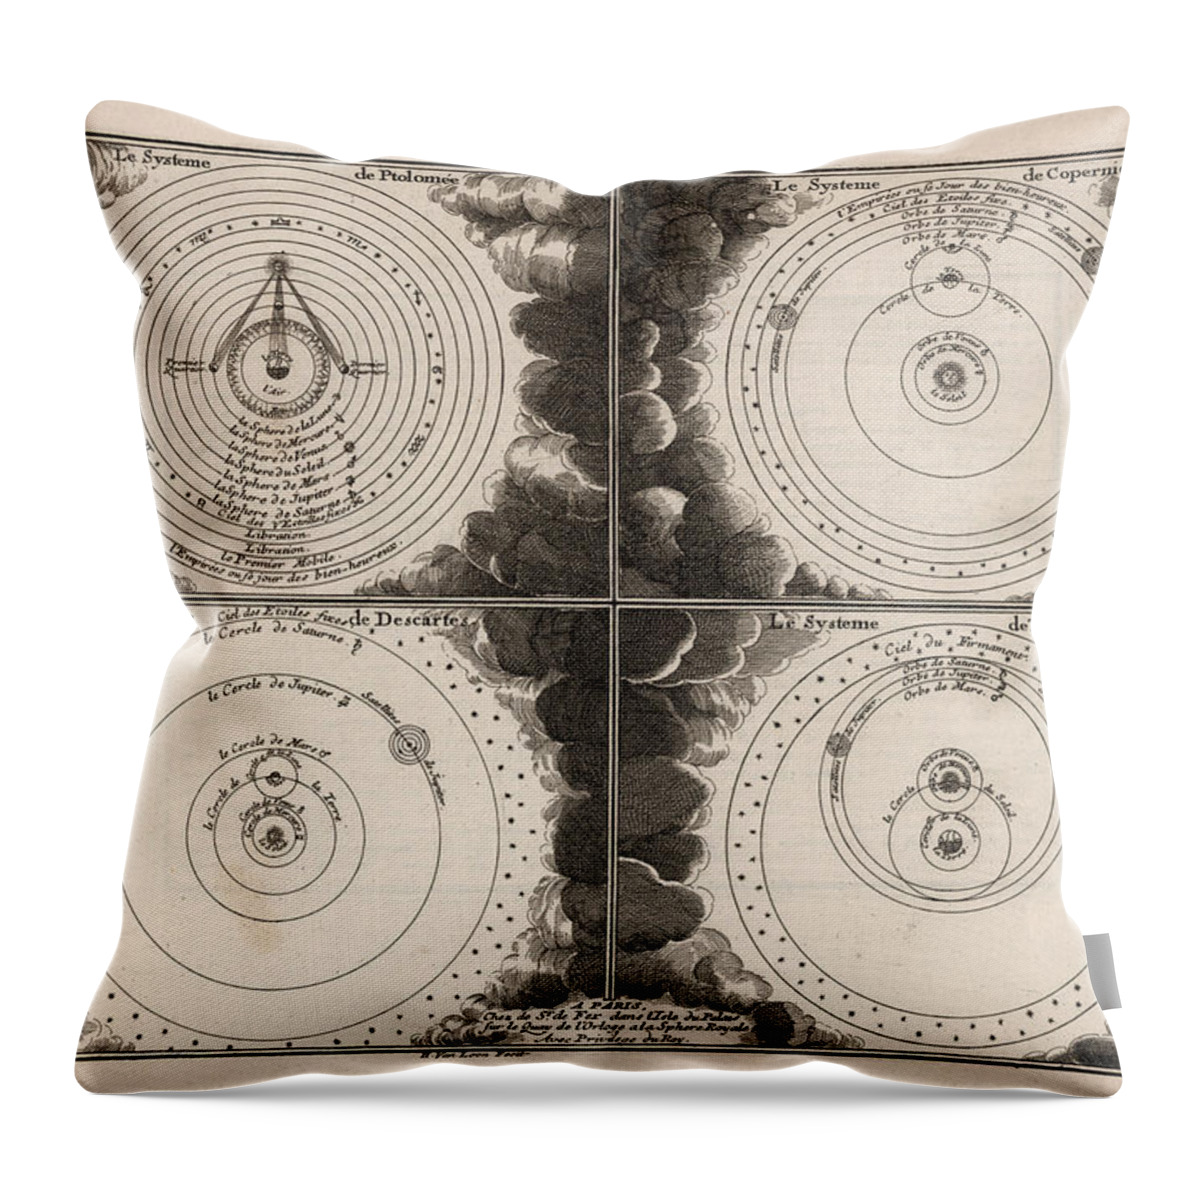 Diagram Of Celestial Systems Throw Pillow featuring the drawing Diagram of the different Celestial Systems - Ptolemy, Copernicus, Descartes, Brahe - Astronomy by Studio Grafiikka